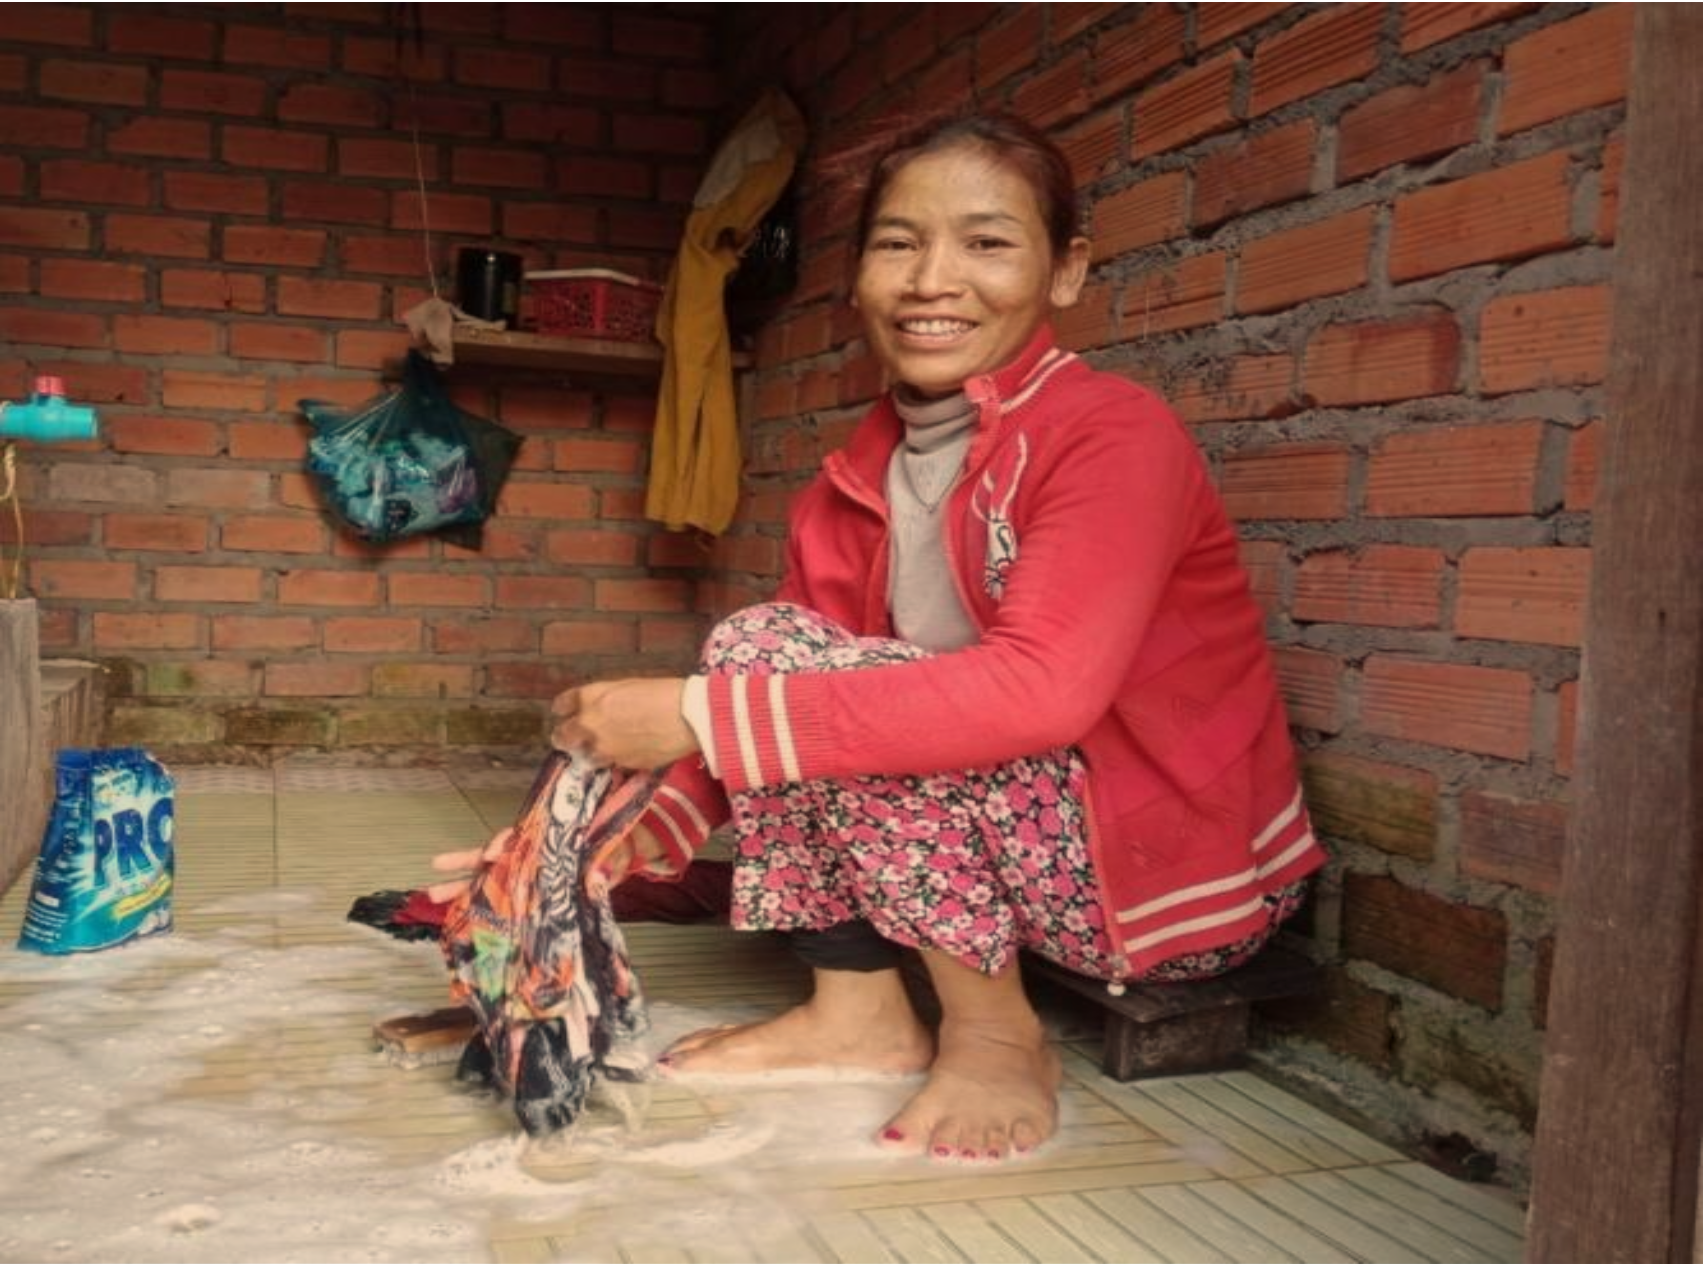 A smiling woman, Sophay crouches on the soapy, tiled floor of her new washroom, doing her laundry.